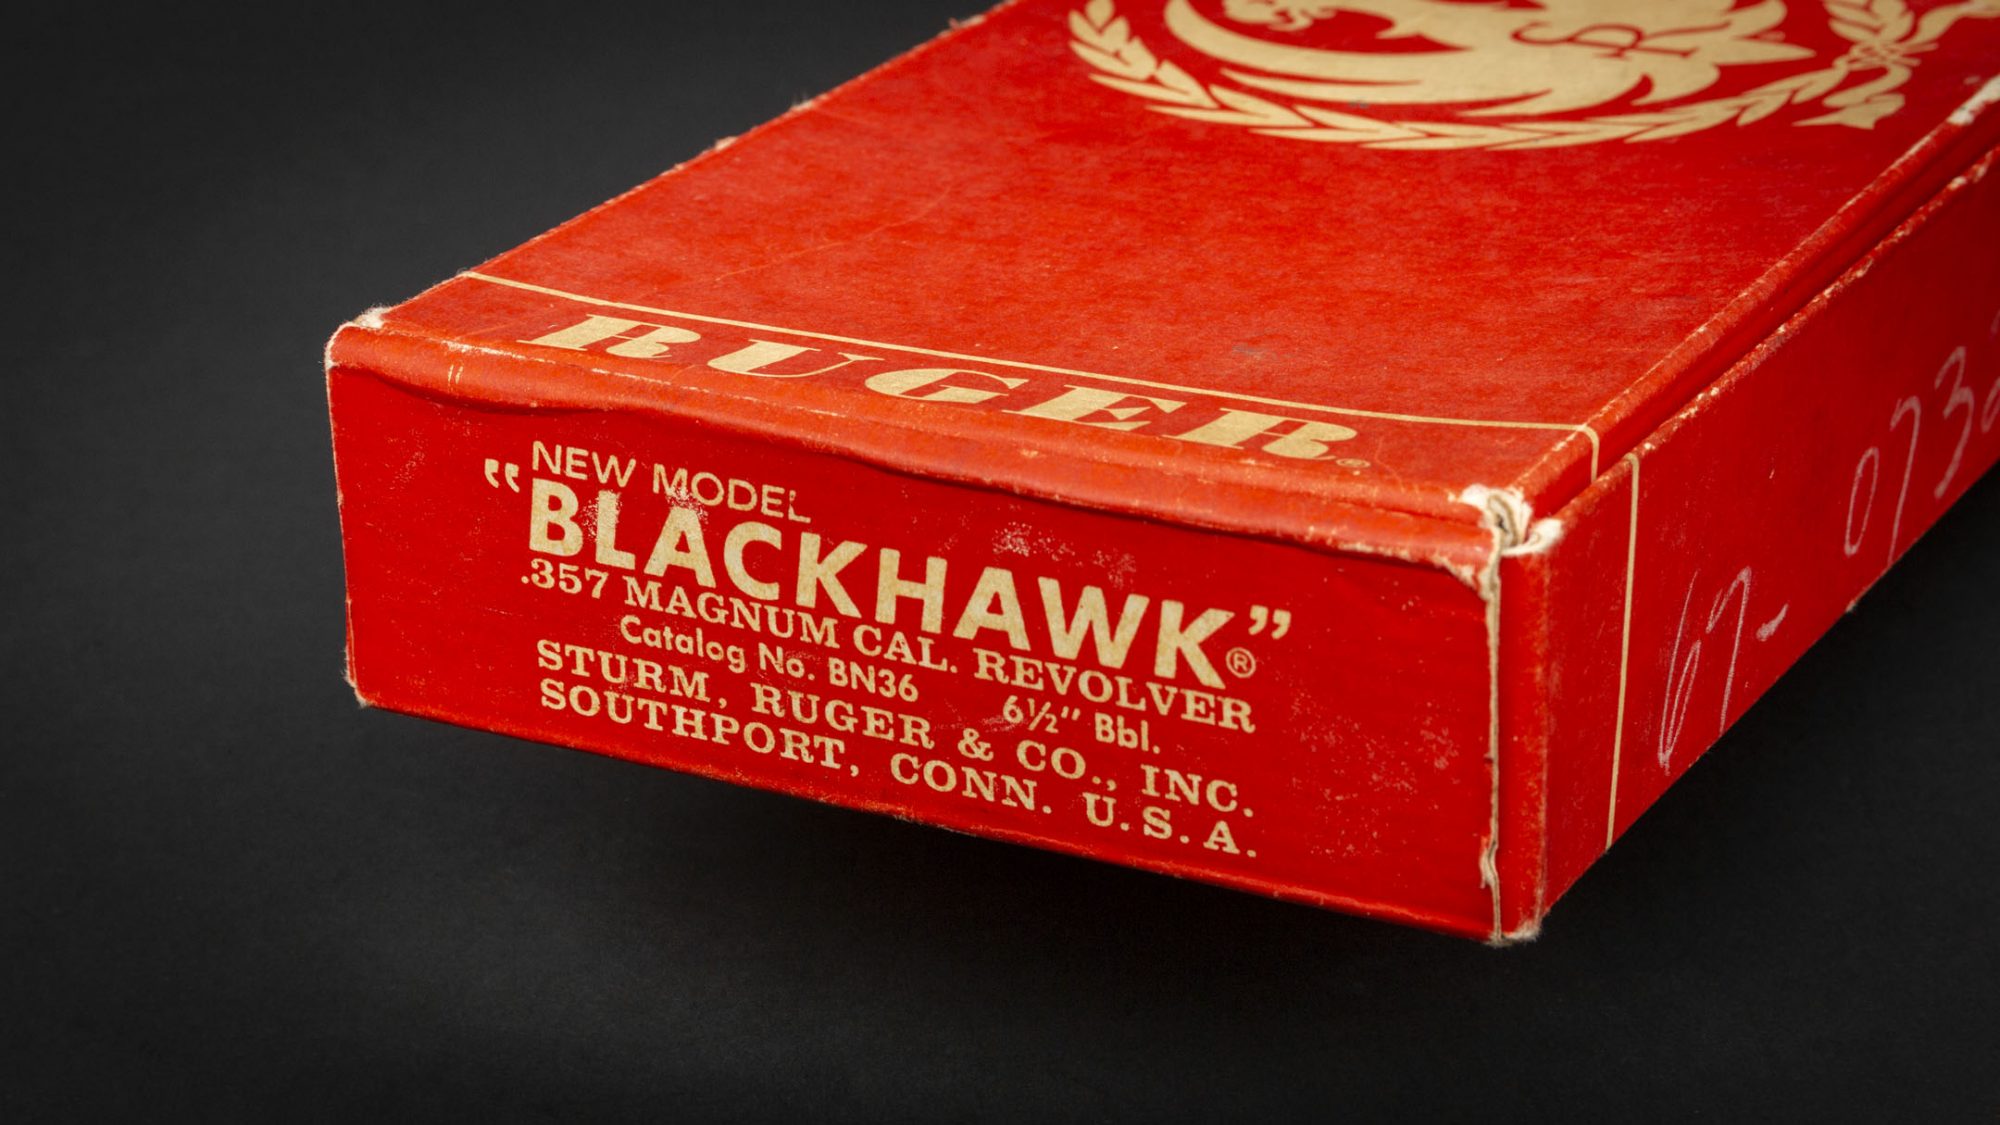 Box for Ruger Blackhawk chambered in .357 Magnum, for sale by Turnbull Restoration Co. of Bloomfield, NY